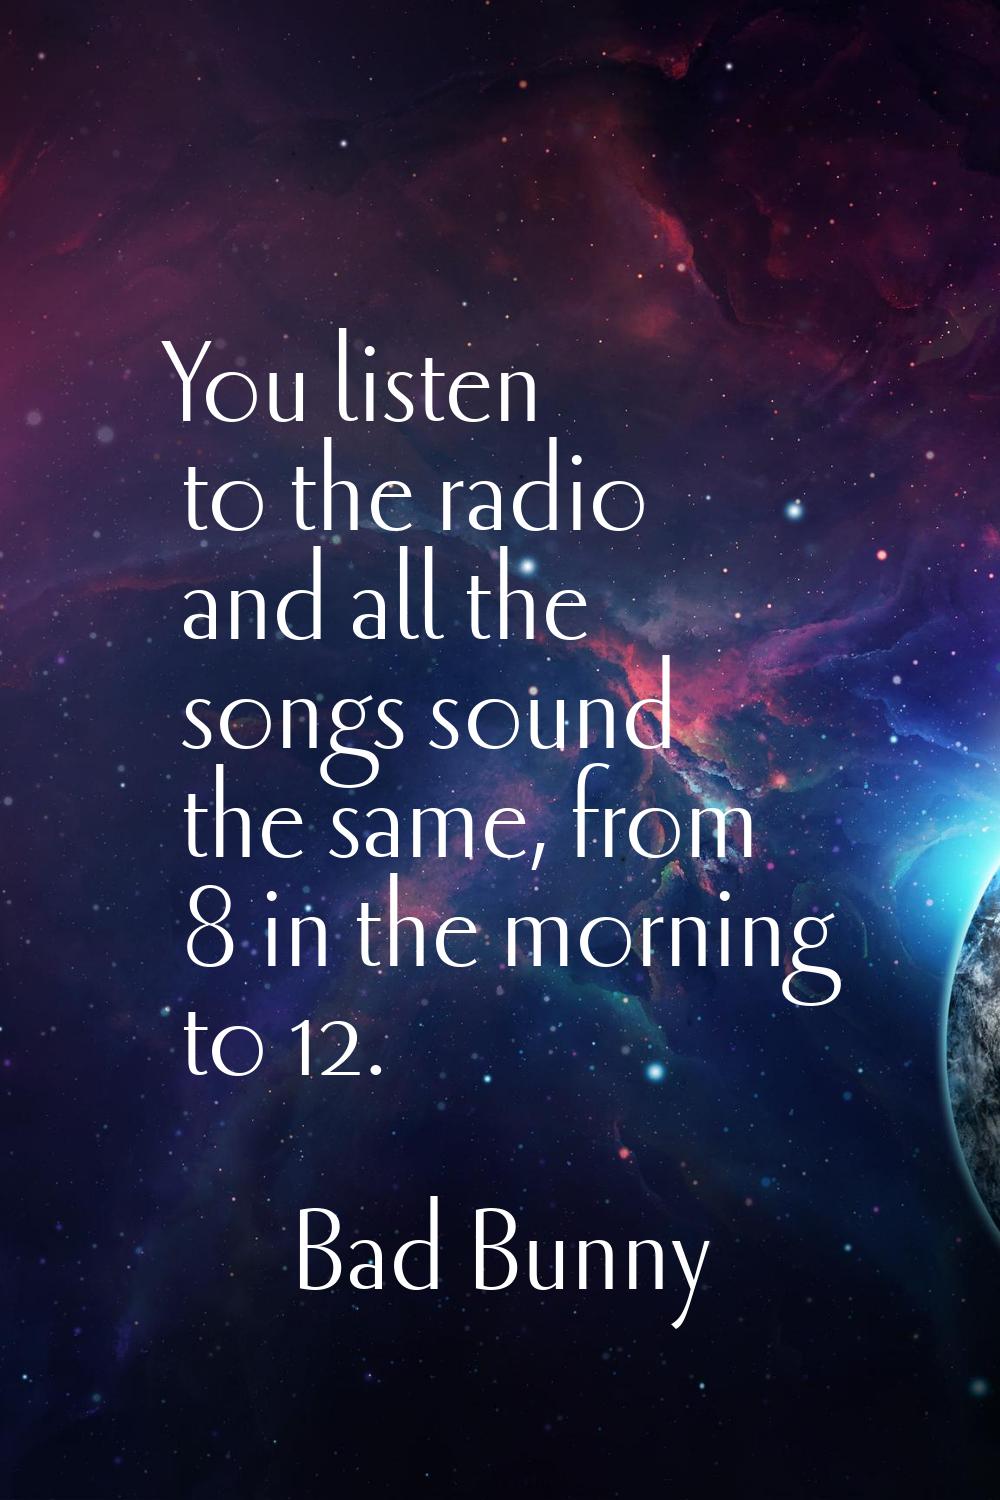 You listen to the radio and all the songs sound the same, from 8 in the morning to 12.